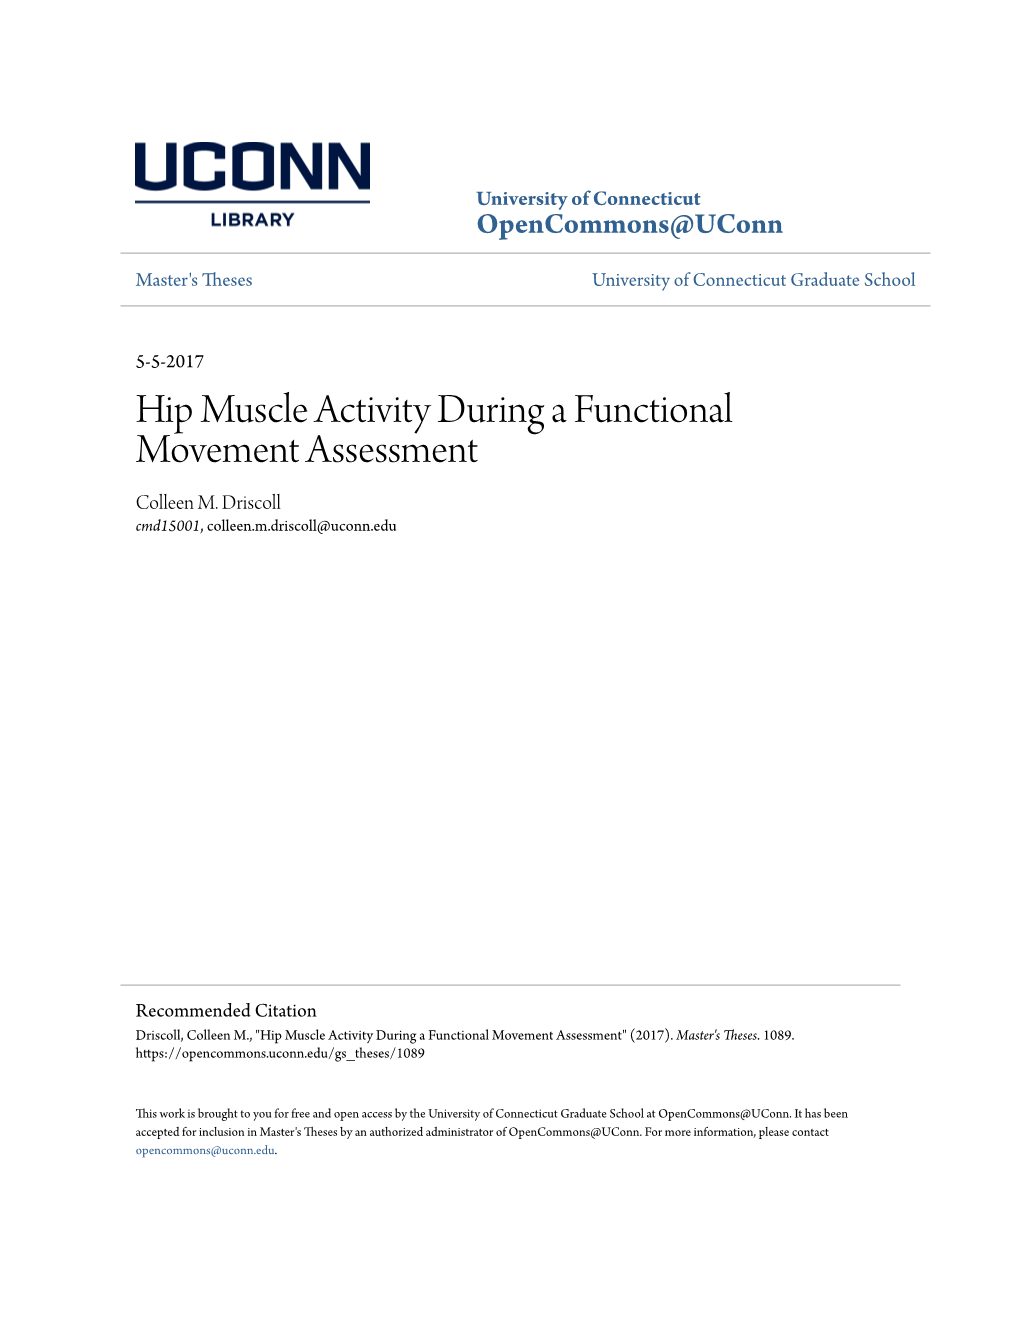 Hip Muscle Activity During a Functional Movement Assessment Colleen M